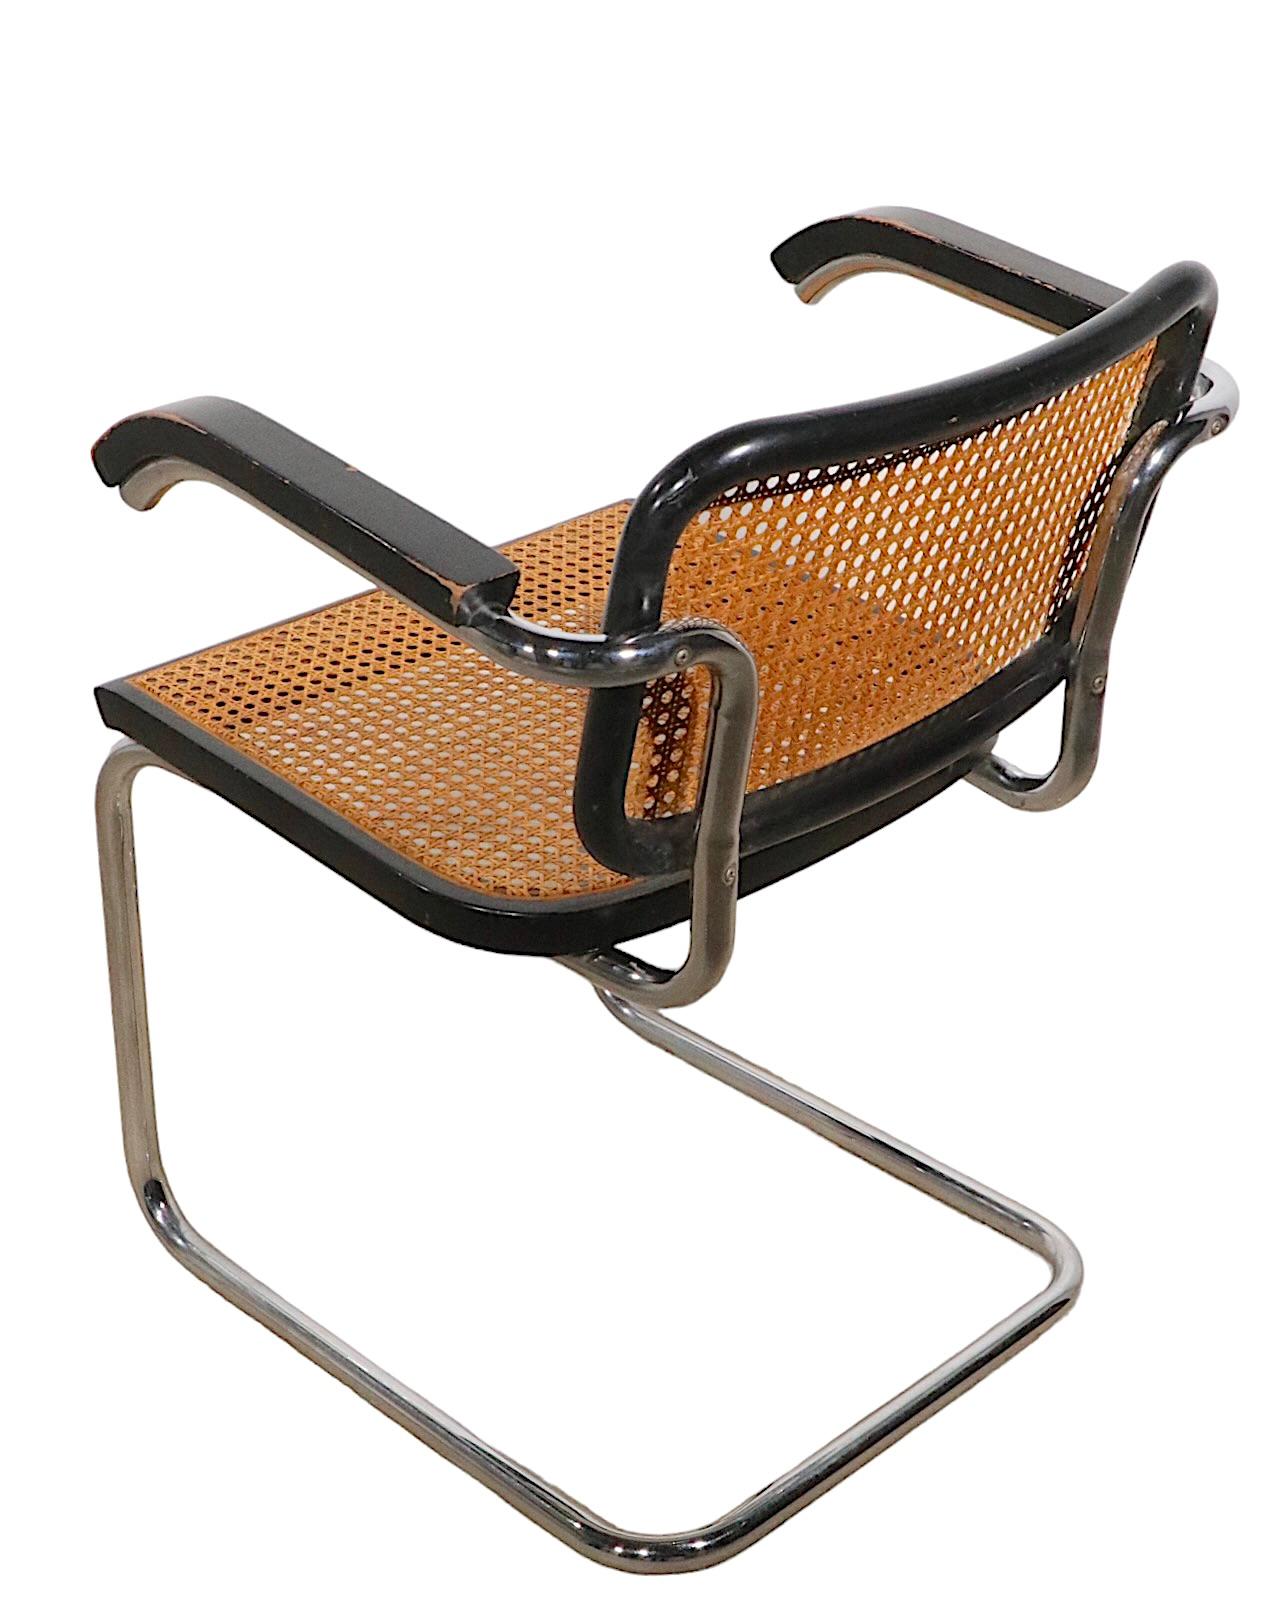 20th Century Chrome and Black Cesca Chair Designed by Marcel Breuer Made in Italy circa 1970s For Sale